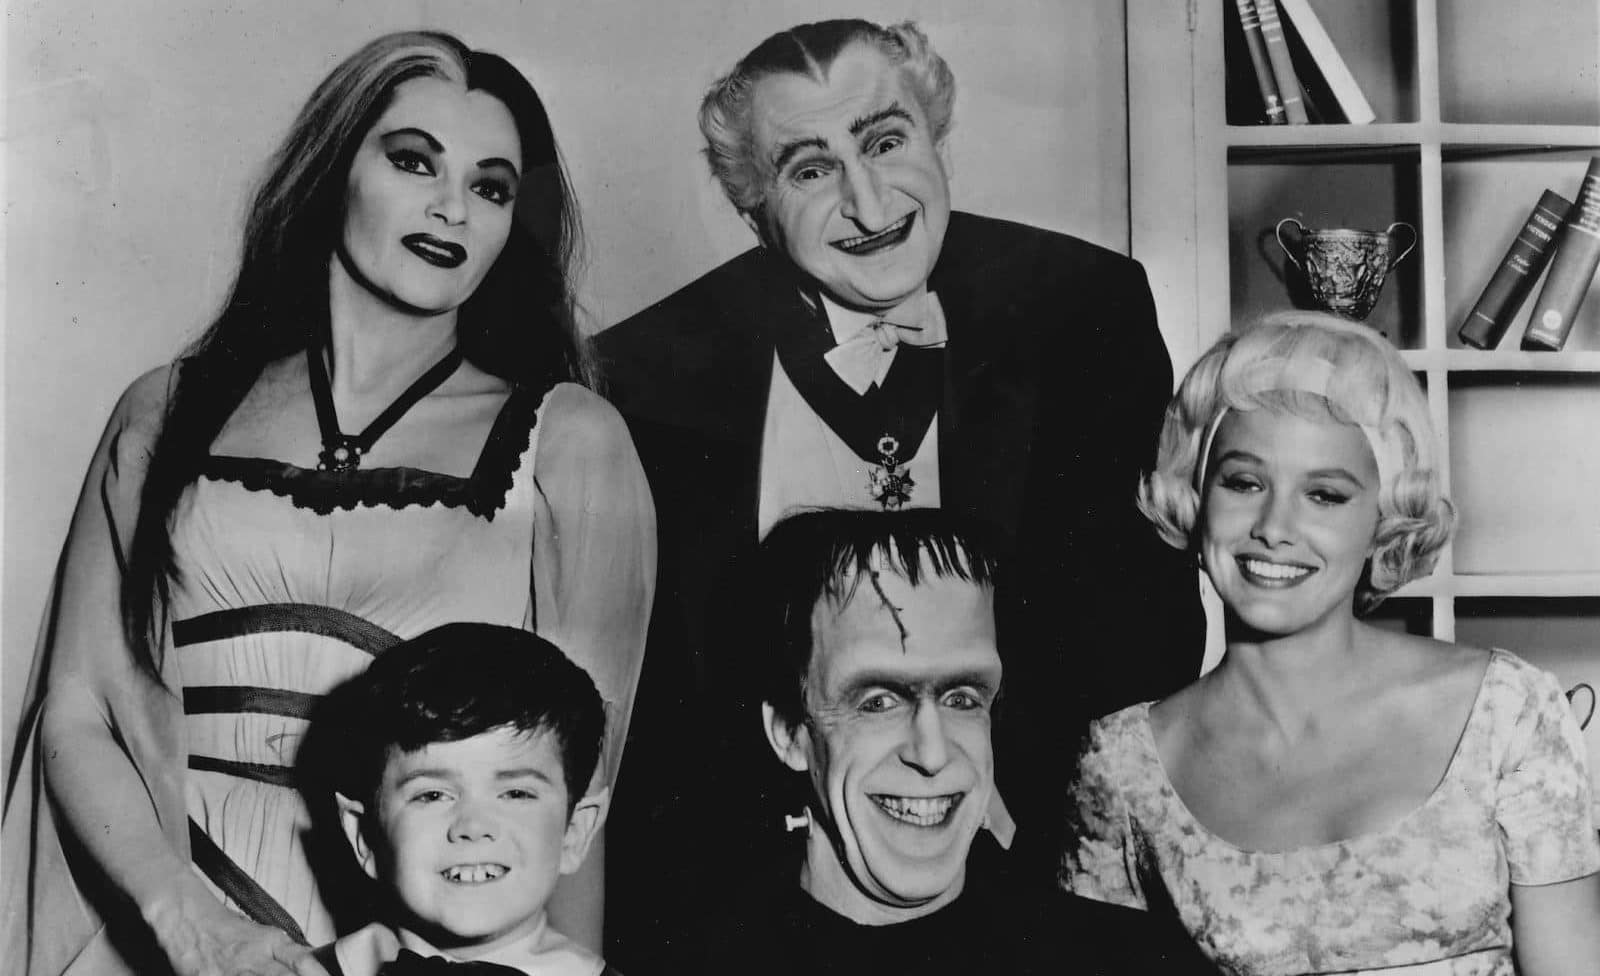 Beverly Owen of "The Munsters" Dies at 81.